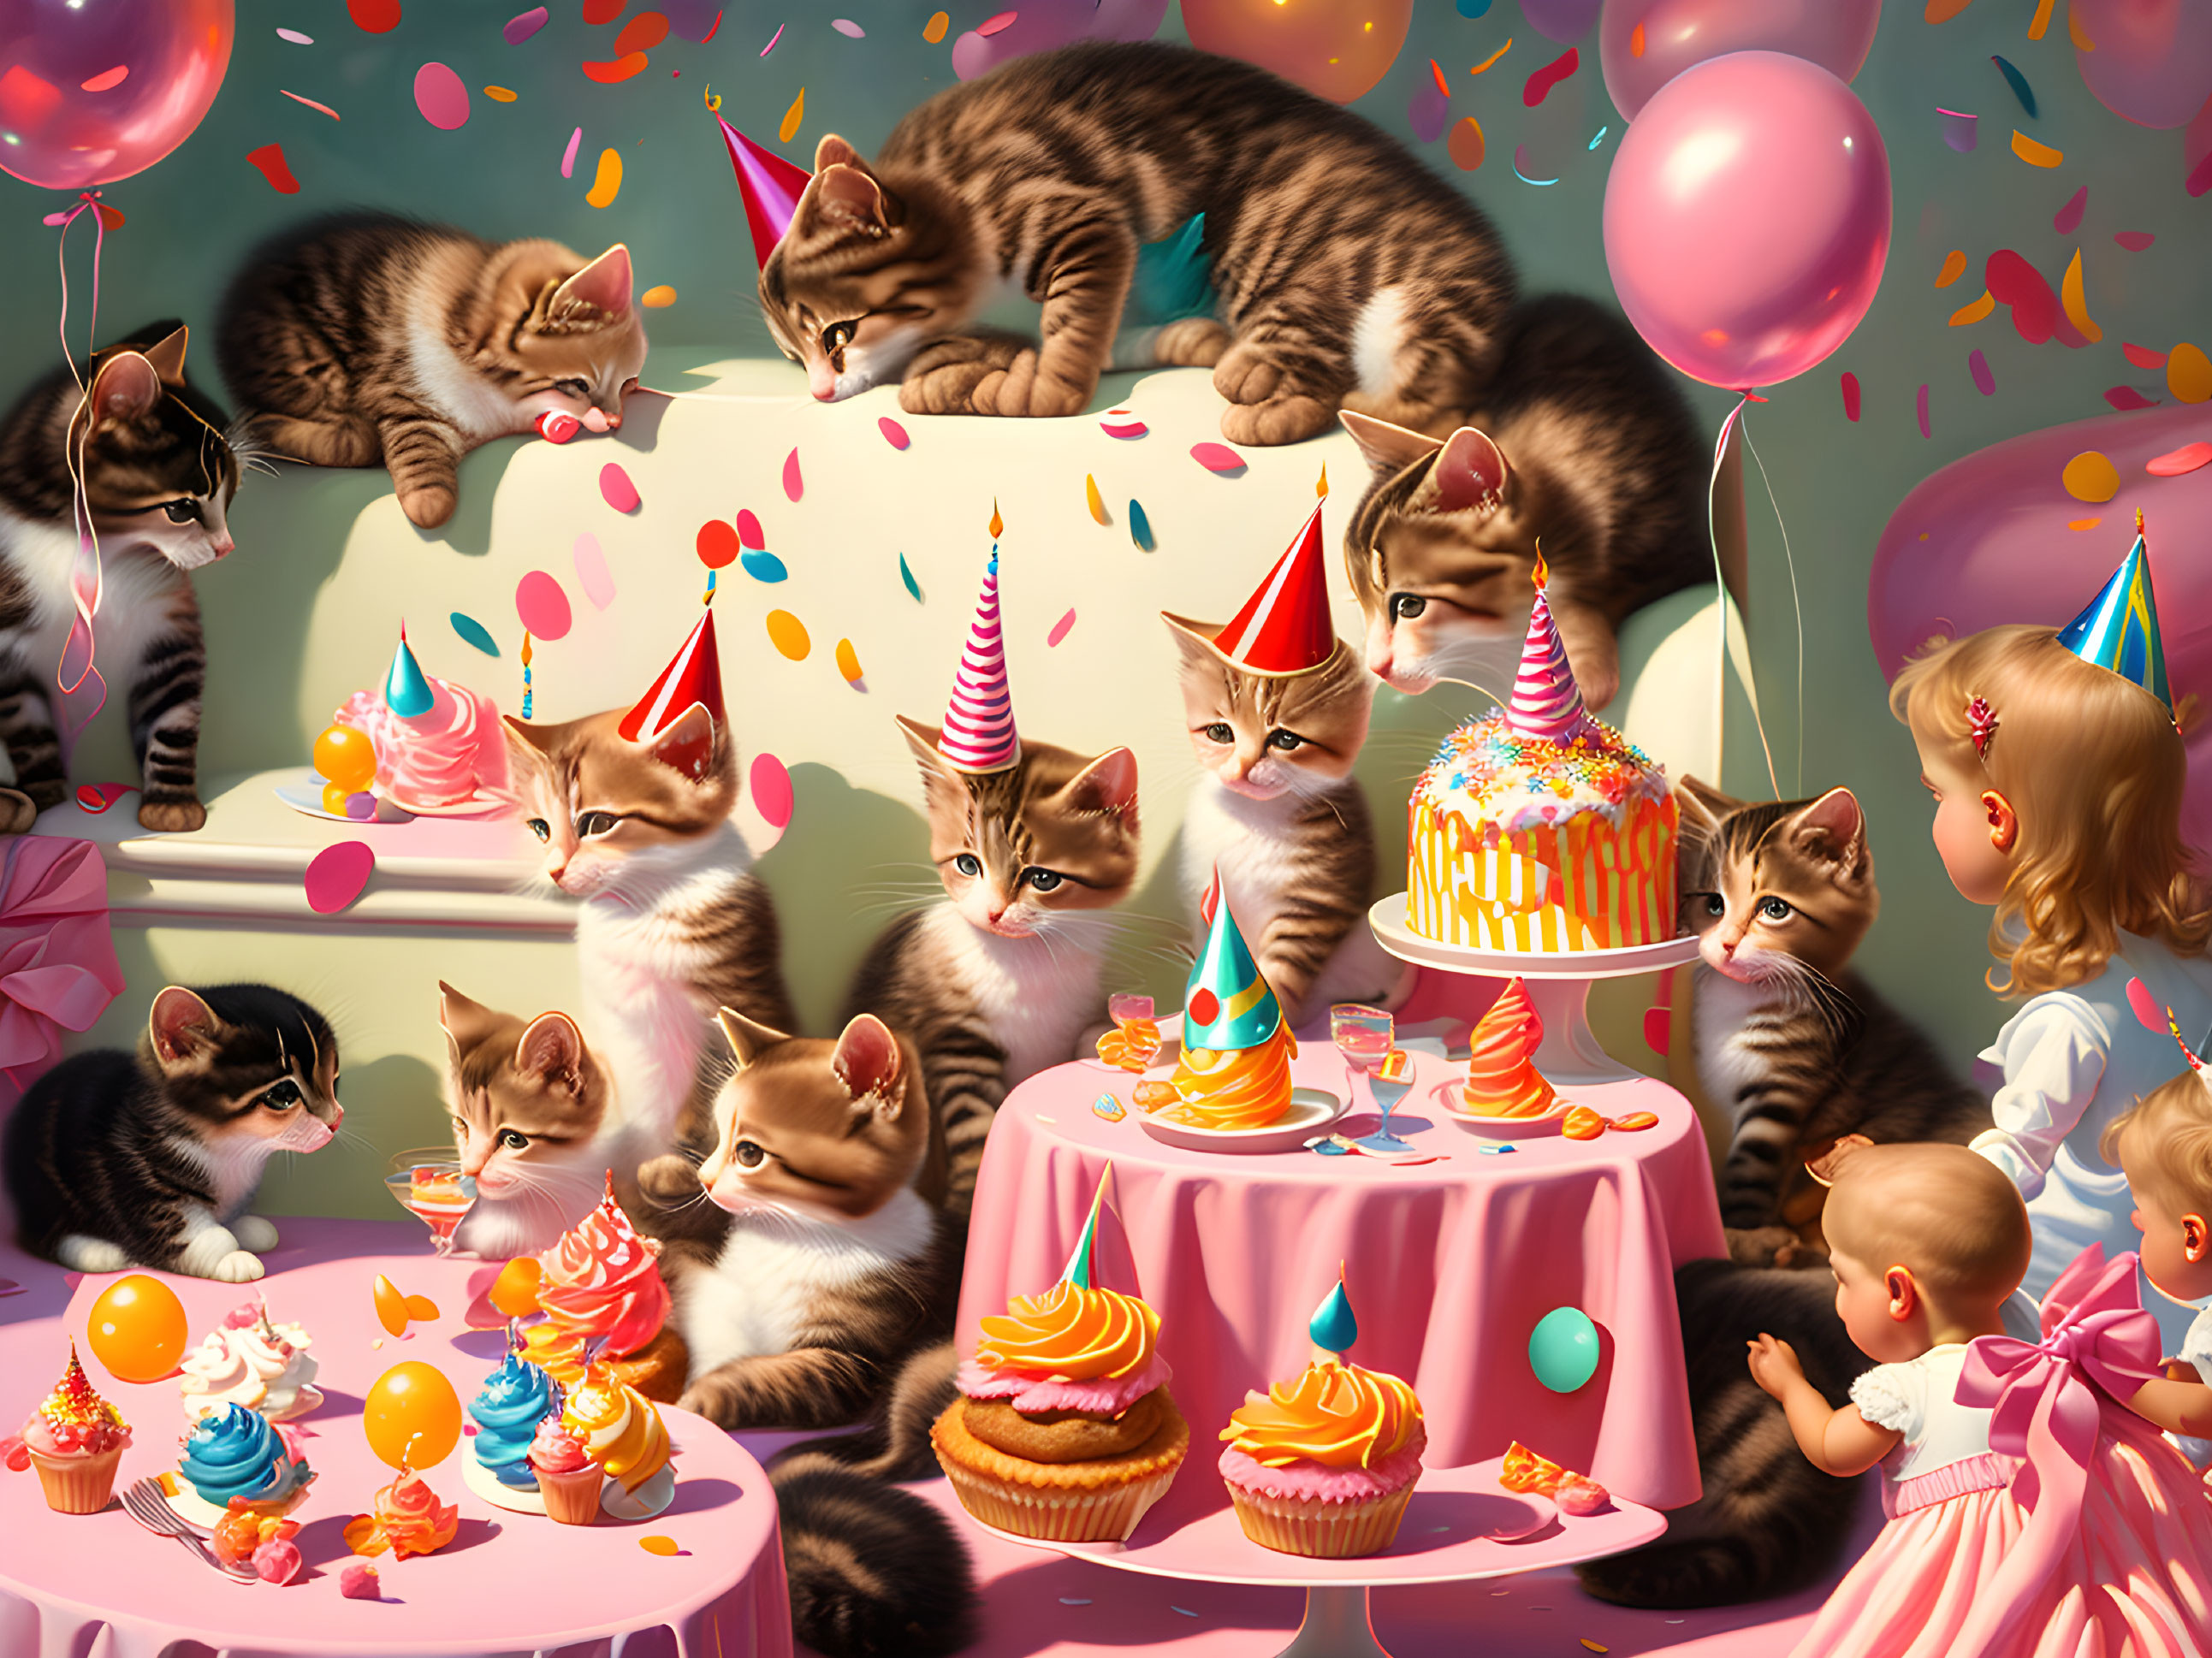 Multiple cats in party hats with cake, cupcakes, balloons, and confetti